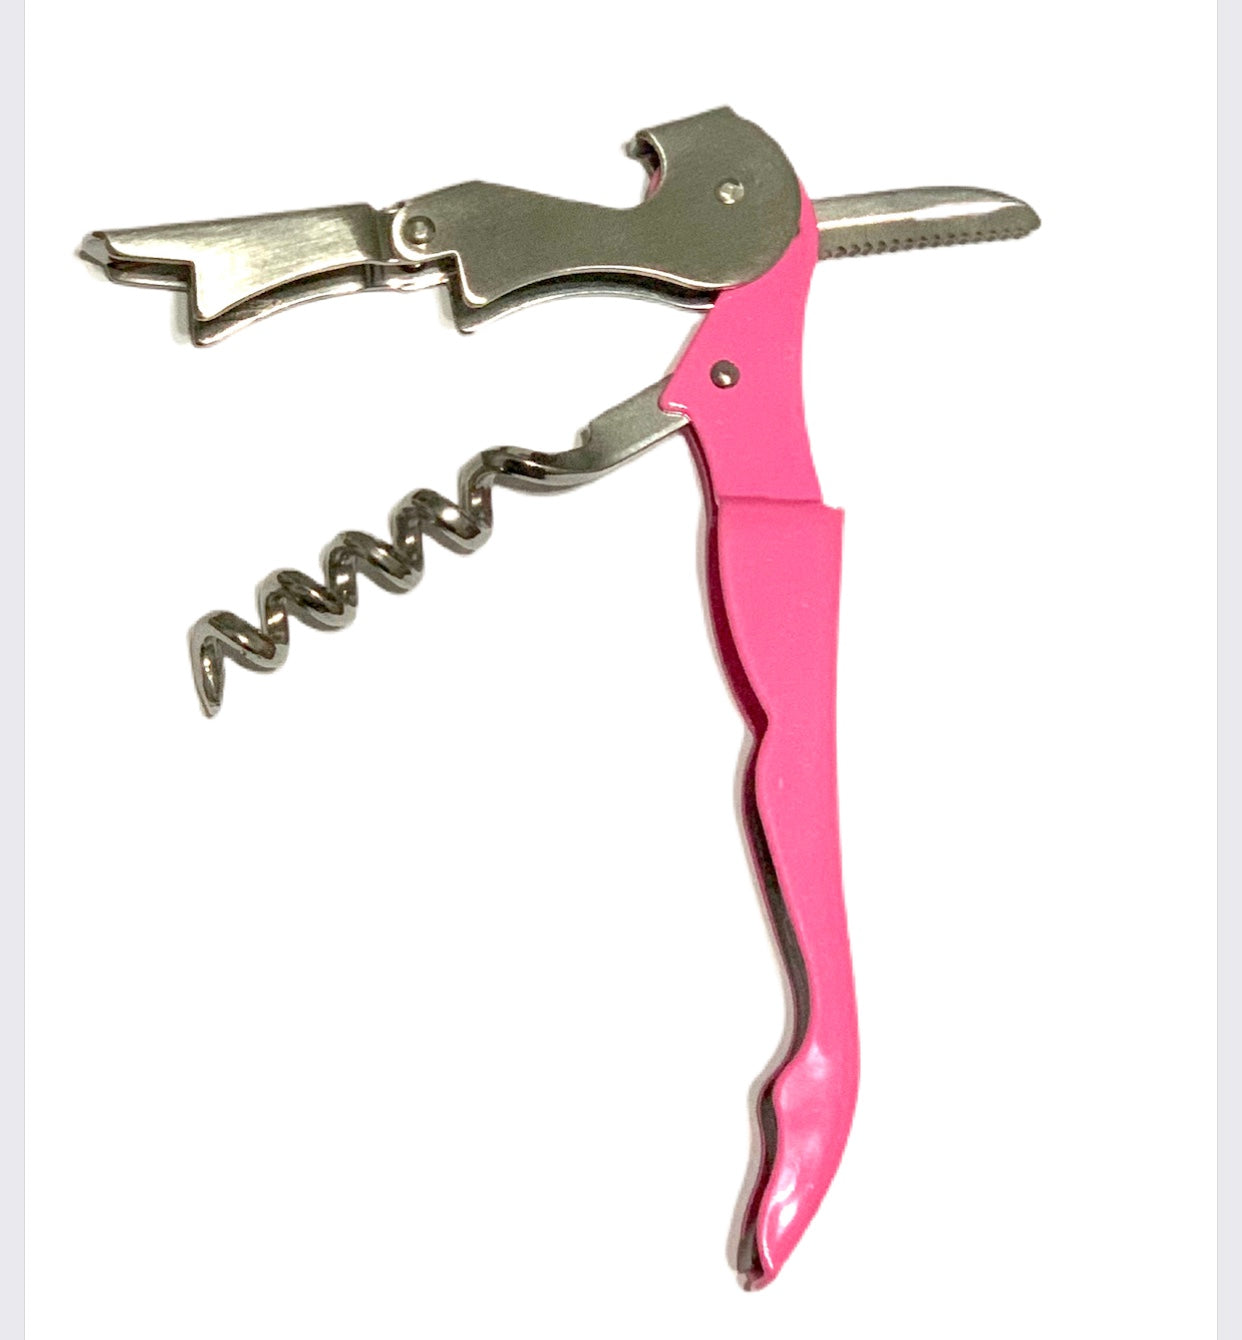 Waiter's Stainless Steel Corkscrew. Heavy Duty, Double-hinged Multi-tool and Portable. Easy to use! Pink. Notice multi-tool function.